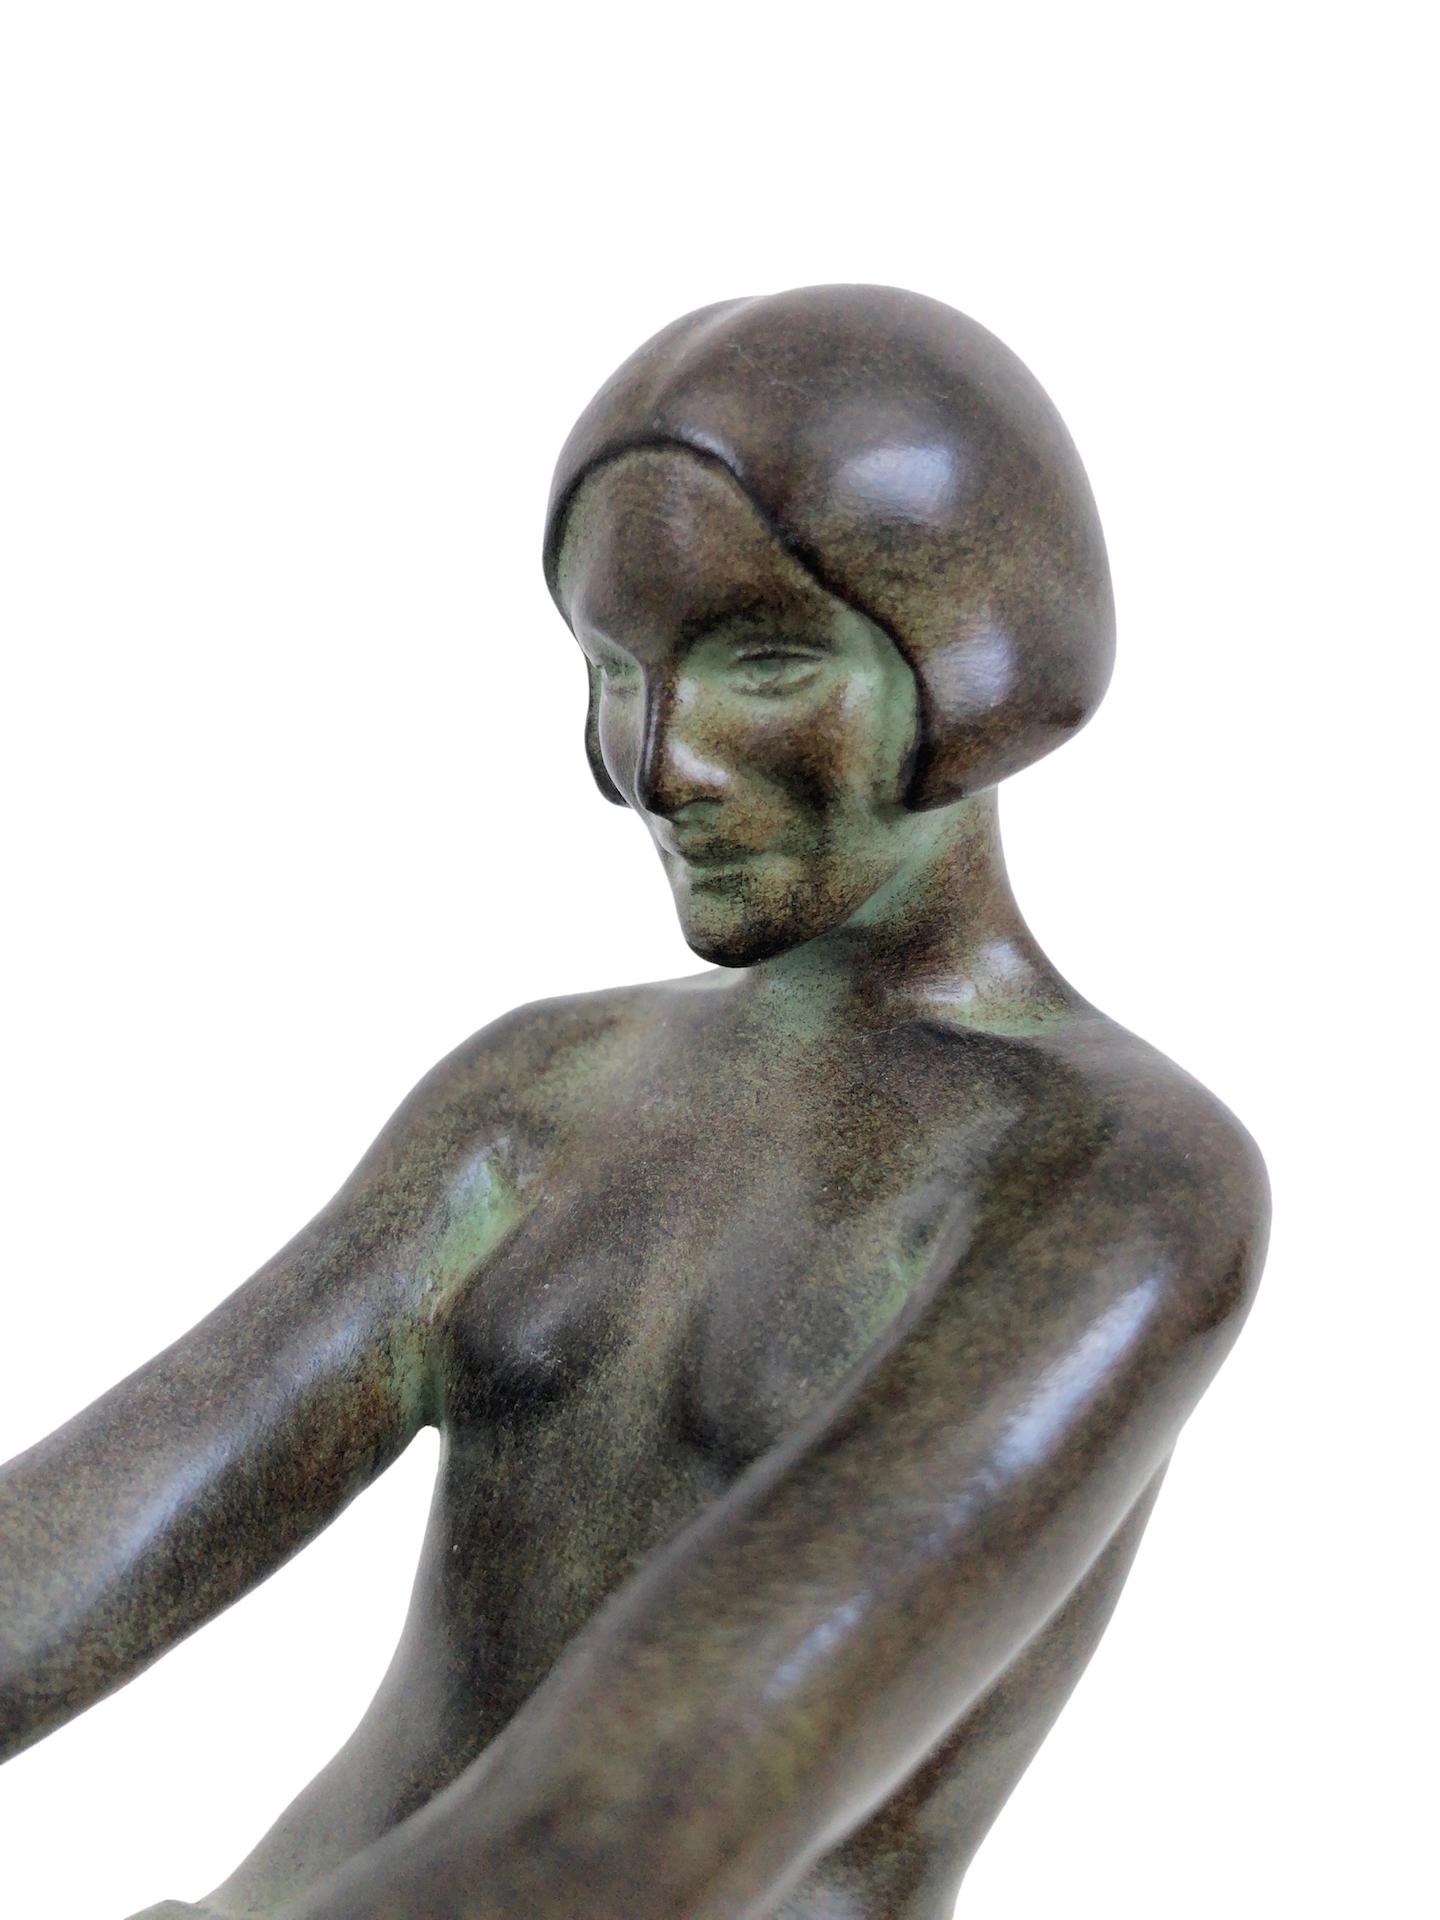 Glass Delassement Lumineux French Art Deco Style Nude Sculpture Lamp by Max Le Verrier